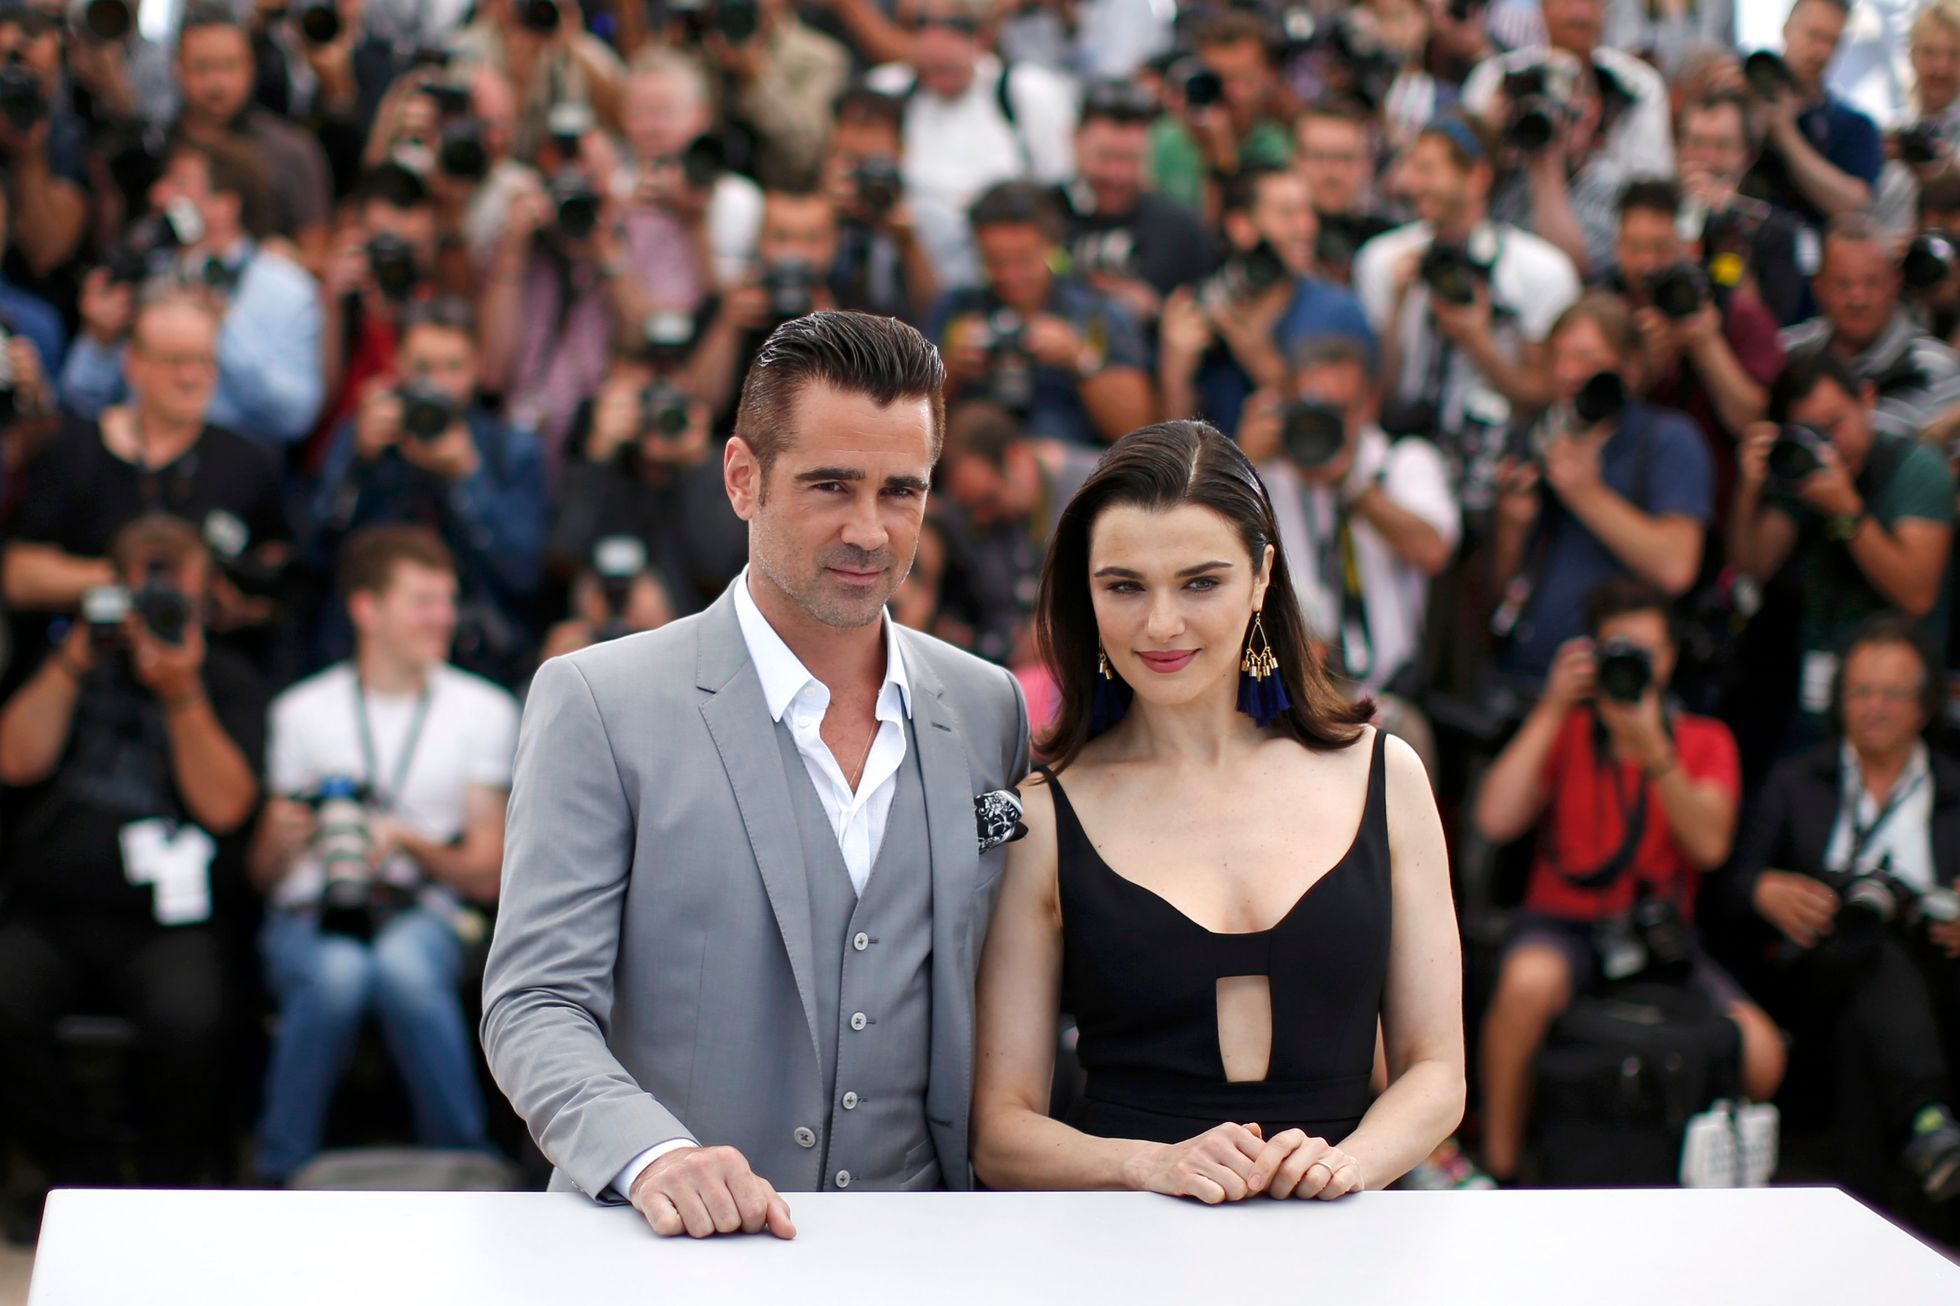 Cast members Rachel Weisz and Colin Farrell pose during a photocall for the film &quot;The Lobster&quot; in competition at the 68th Cannes Film Festival in Cannes